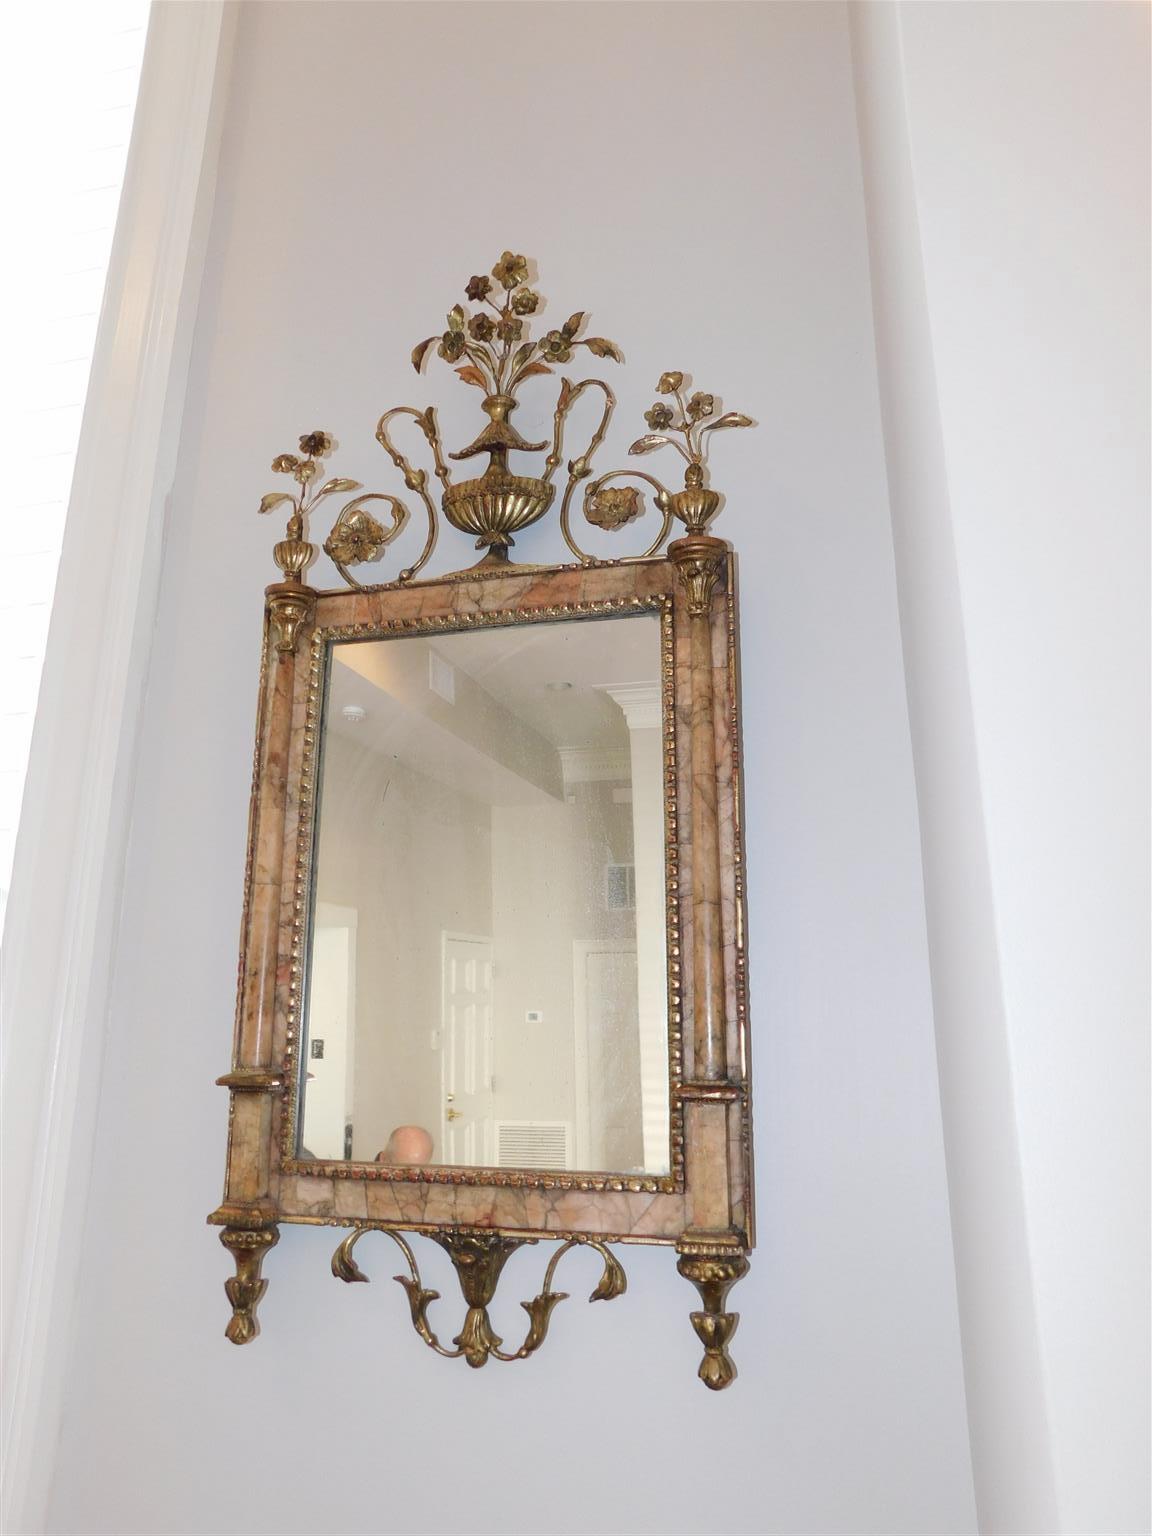 Italian Neoclassical Bilboa Marble & Gilt Wood Foliage Urn Wall Mirror, C. 1780  In Excellent Condition For Sale In Hollywood, SC